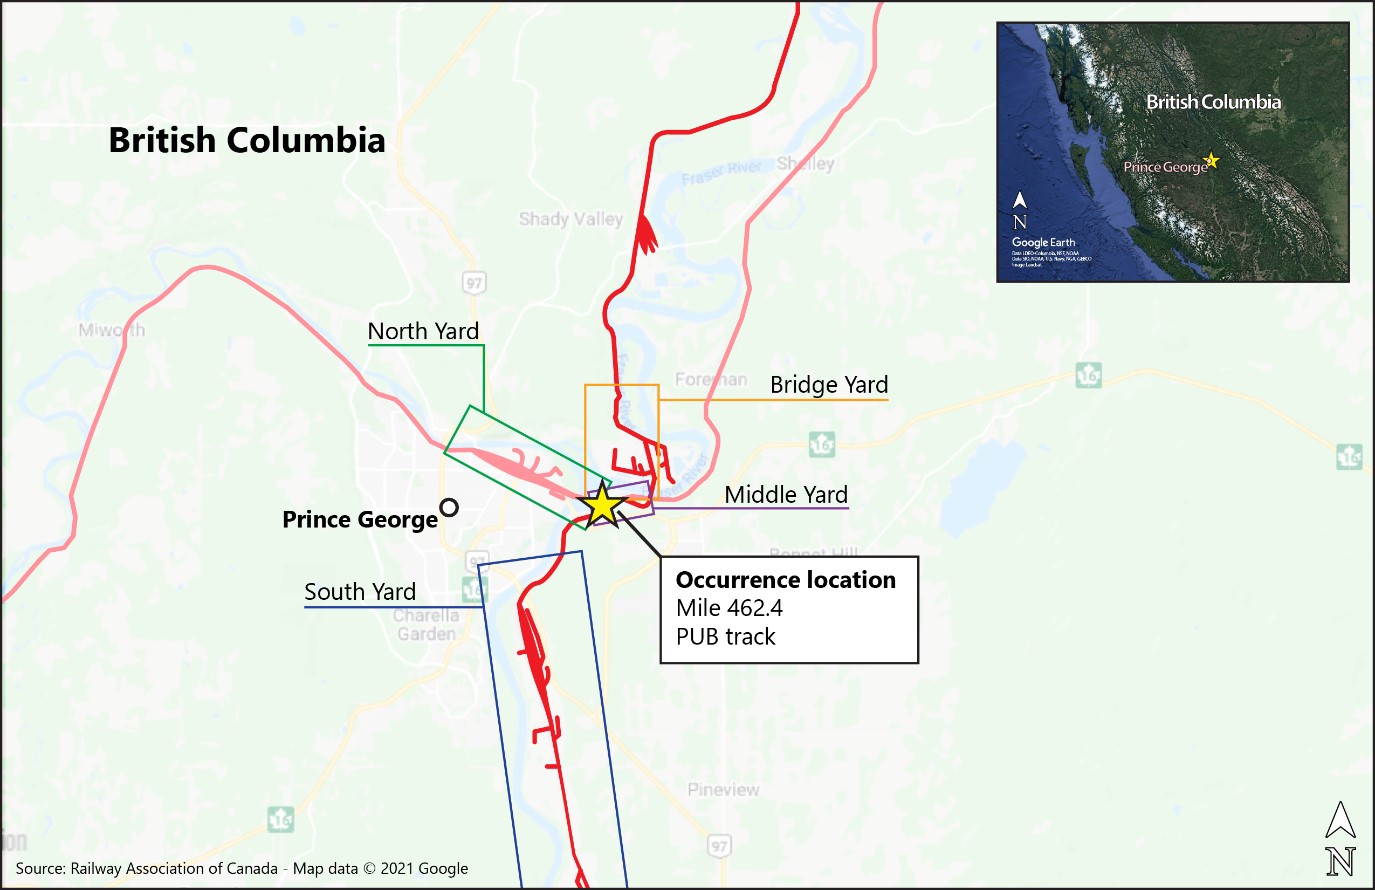 Map showing the occurrence location, with inset map showing the location of Prince George, British Columbia (Source of main image: Railway Association of Canada, Canadian Rail Atlas, with TSB annotations; source of inset image: Google Earth, with TSB annotations)